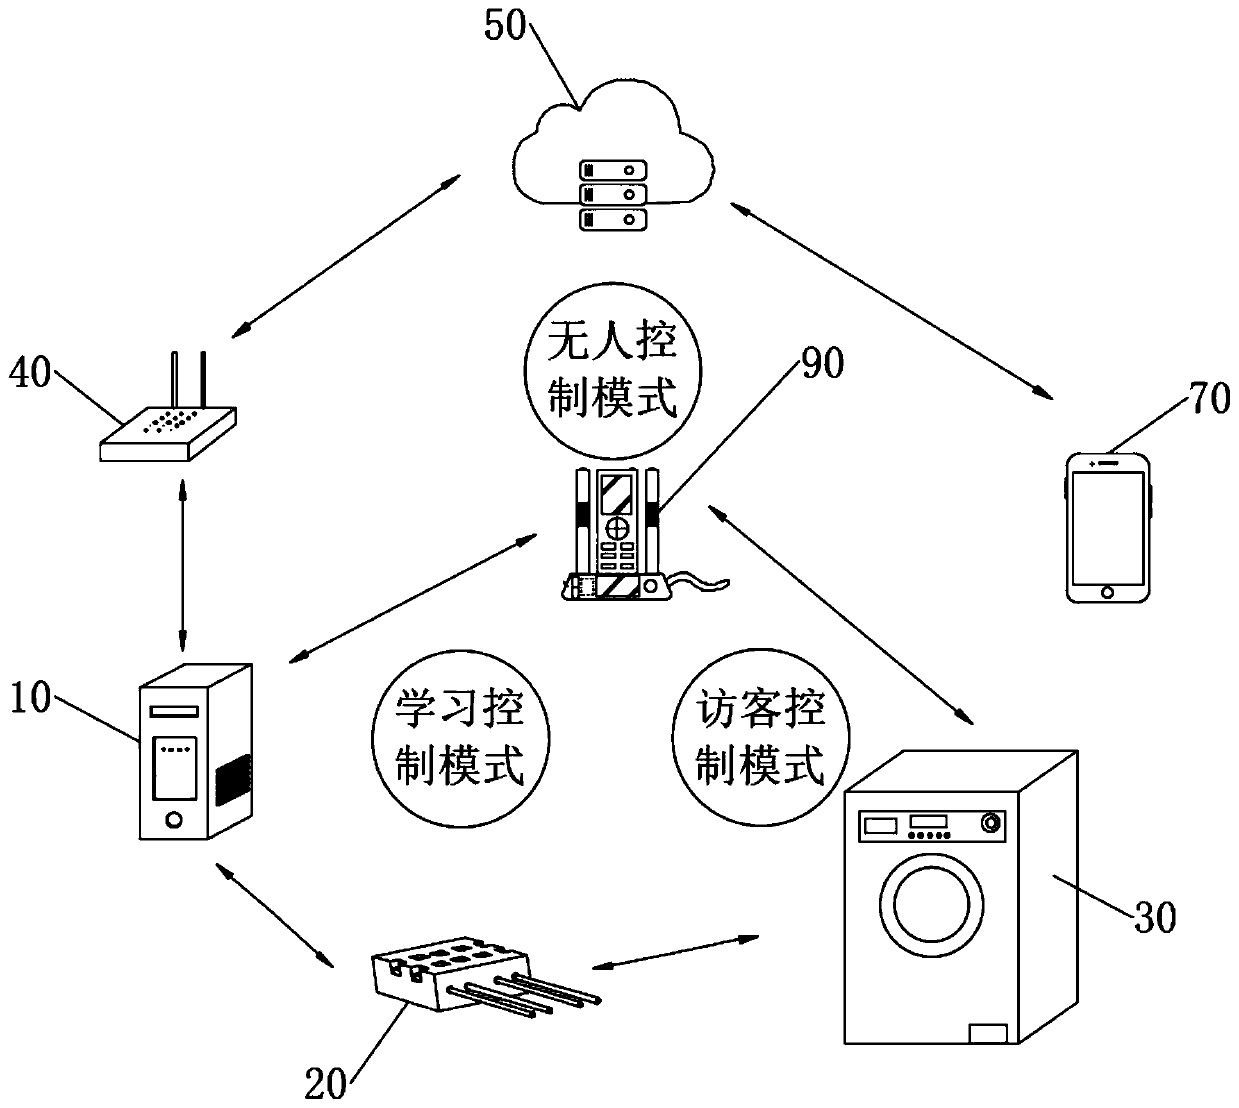 Auxiliary management system of smart home equipment and use method of system